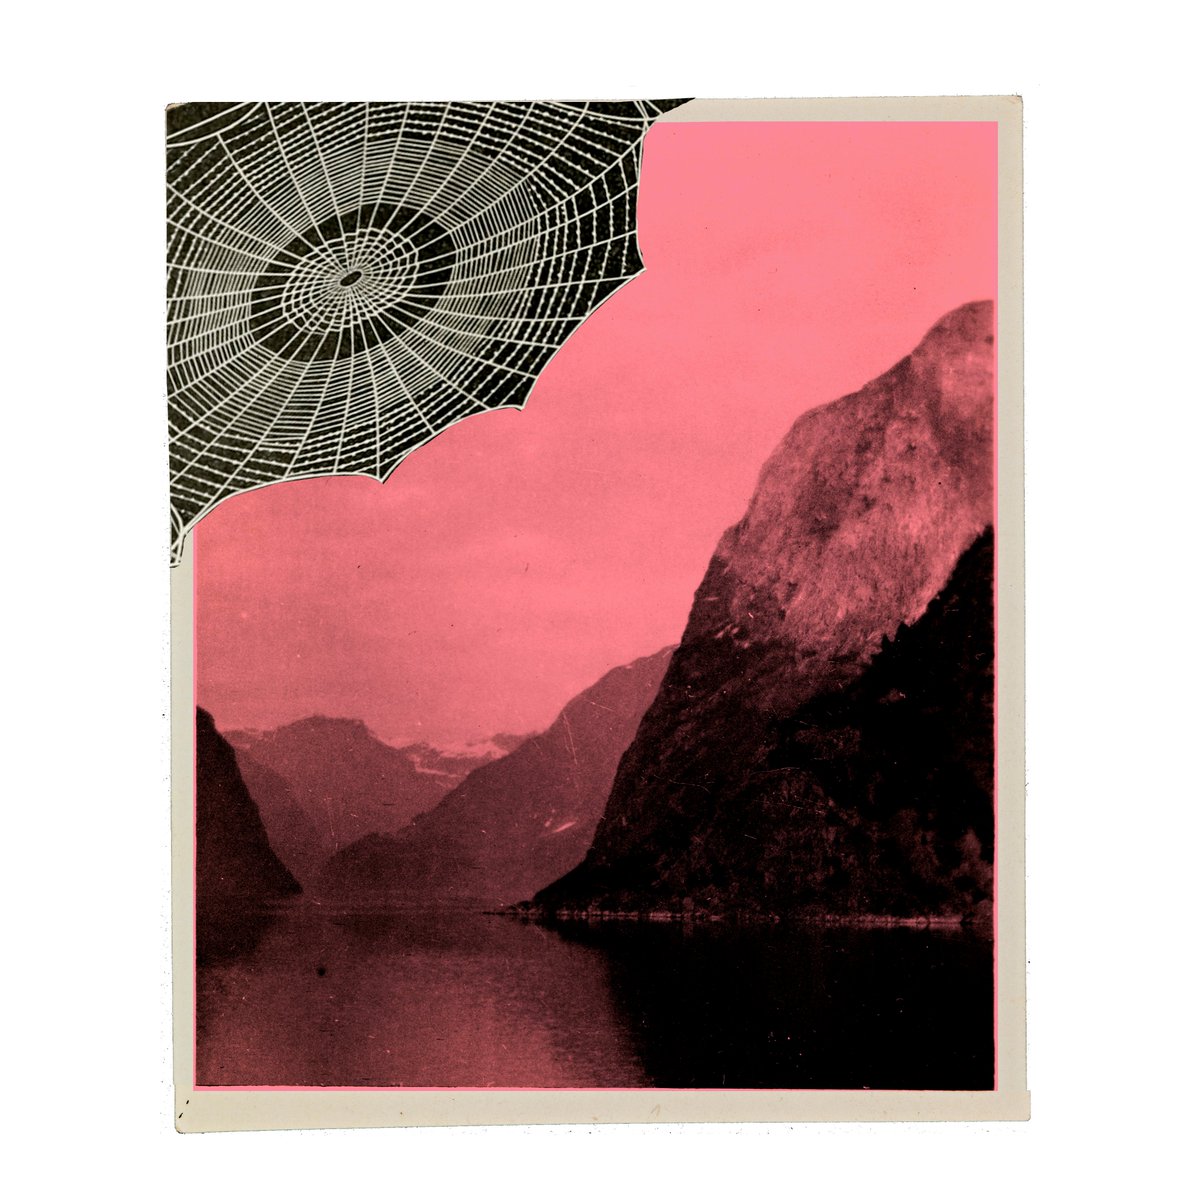 Some newer collage work

I have a few prints of this kind of work up for sale at https://t.co/Ed6vmUQJkQ ? 